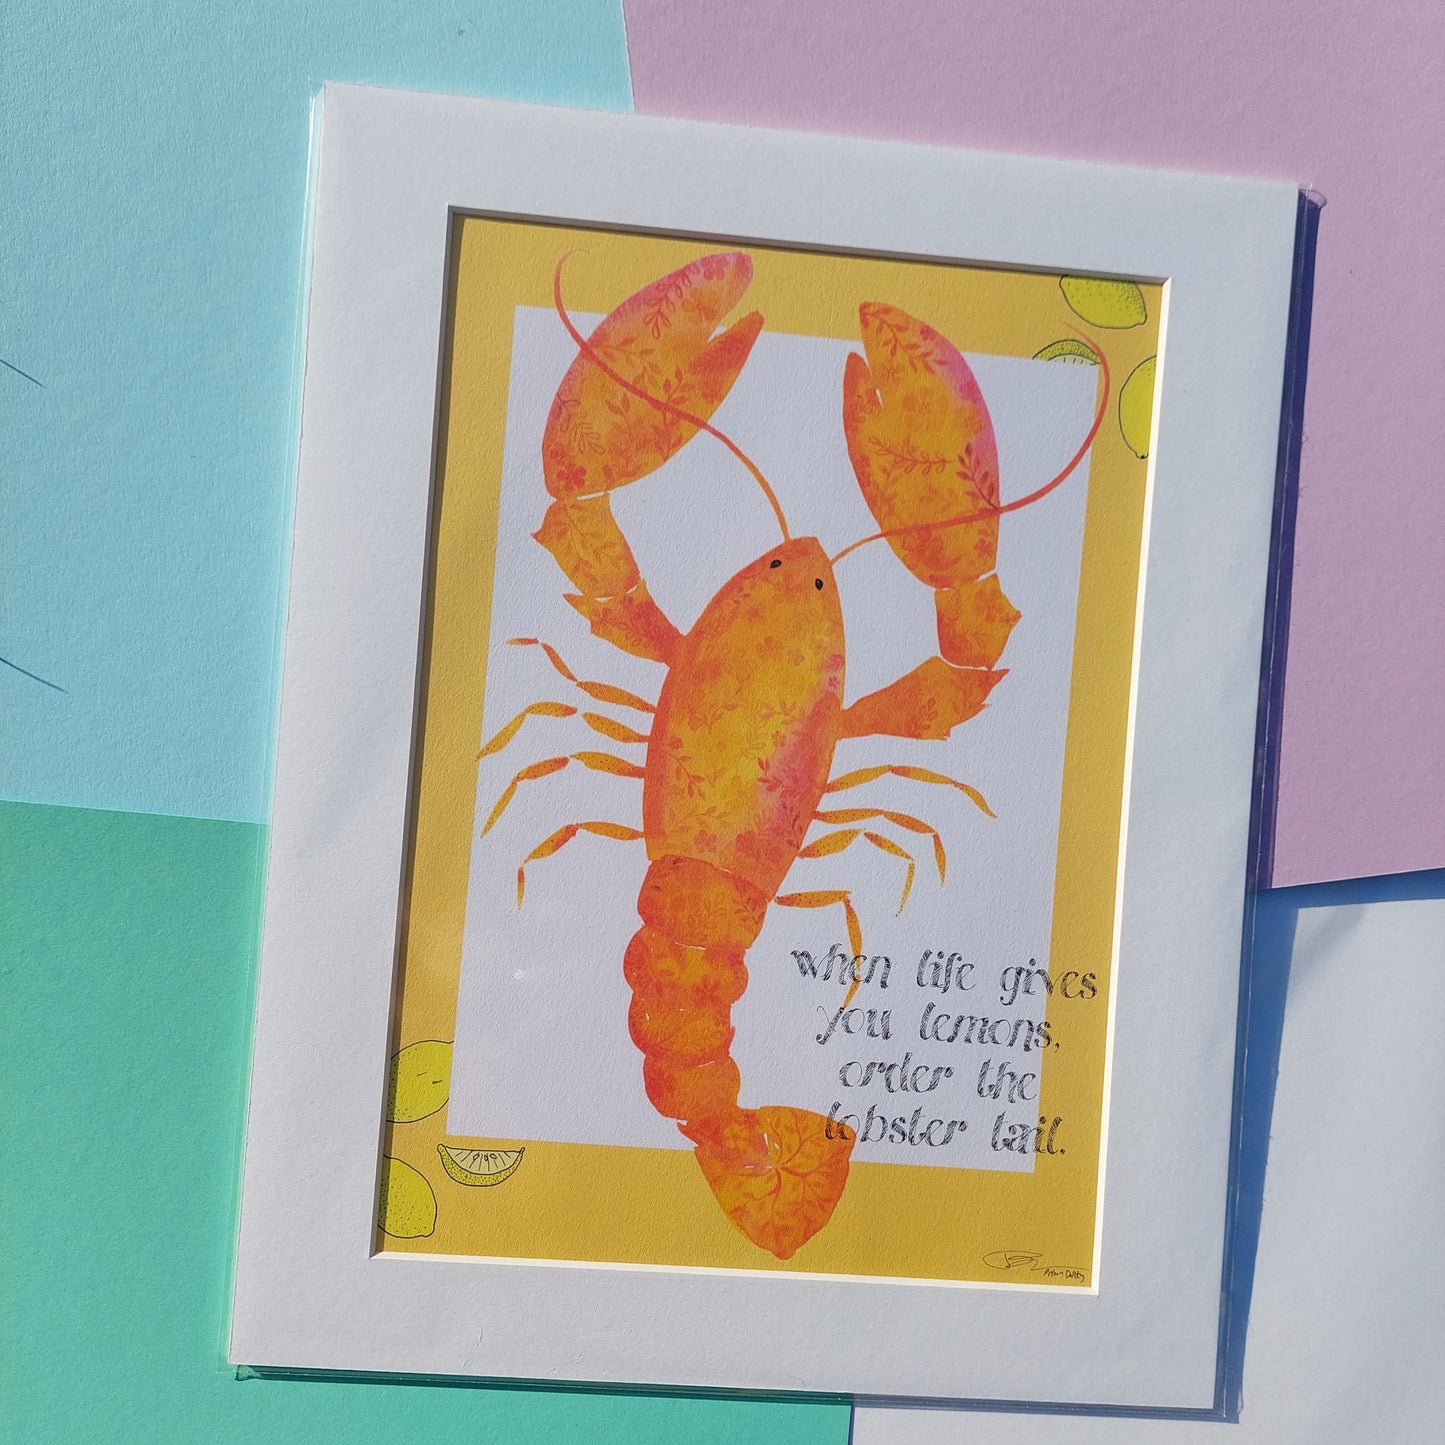 When Life Gives You Lemons... Order the Lobster Tail